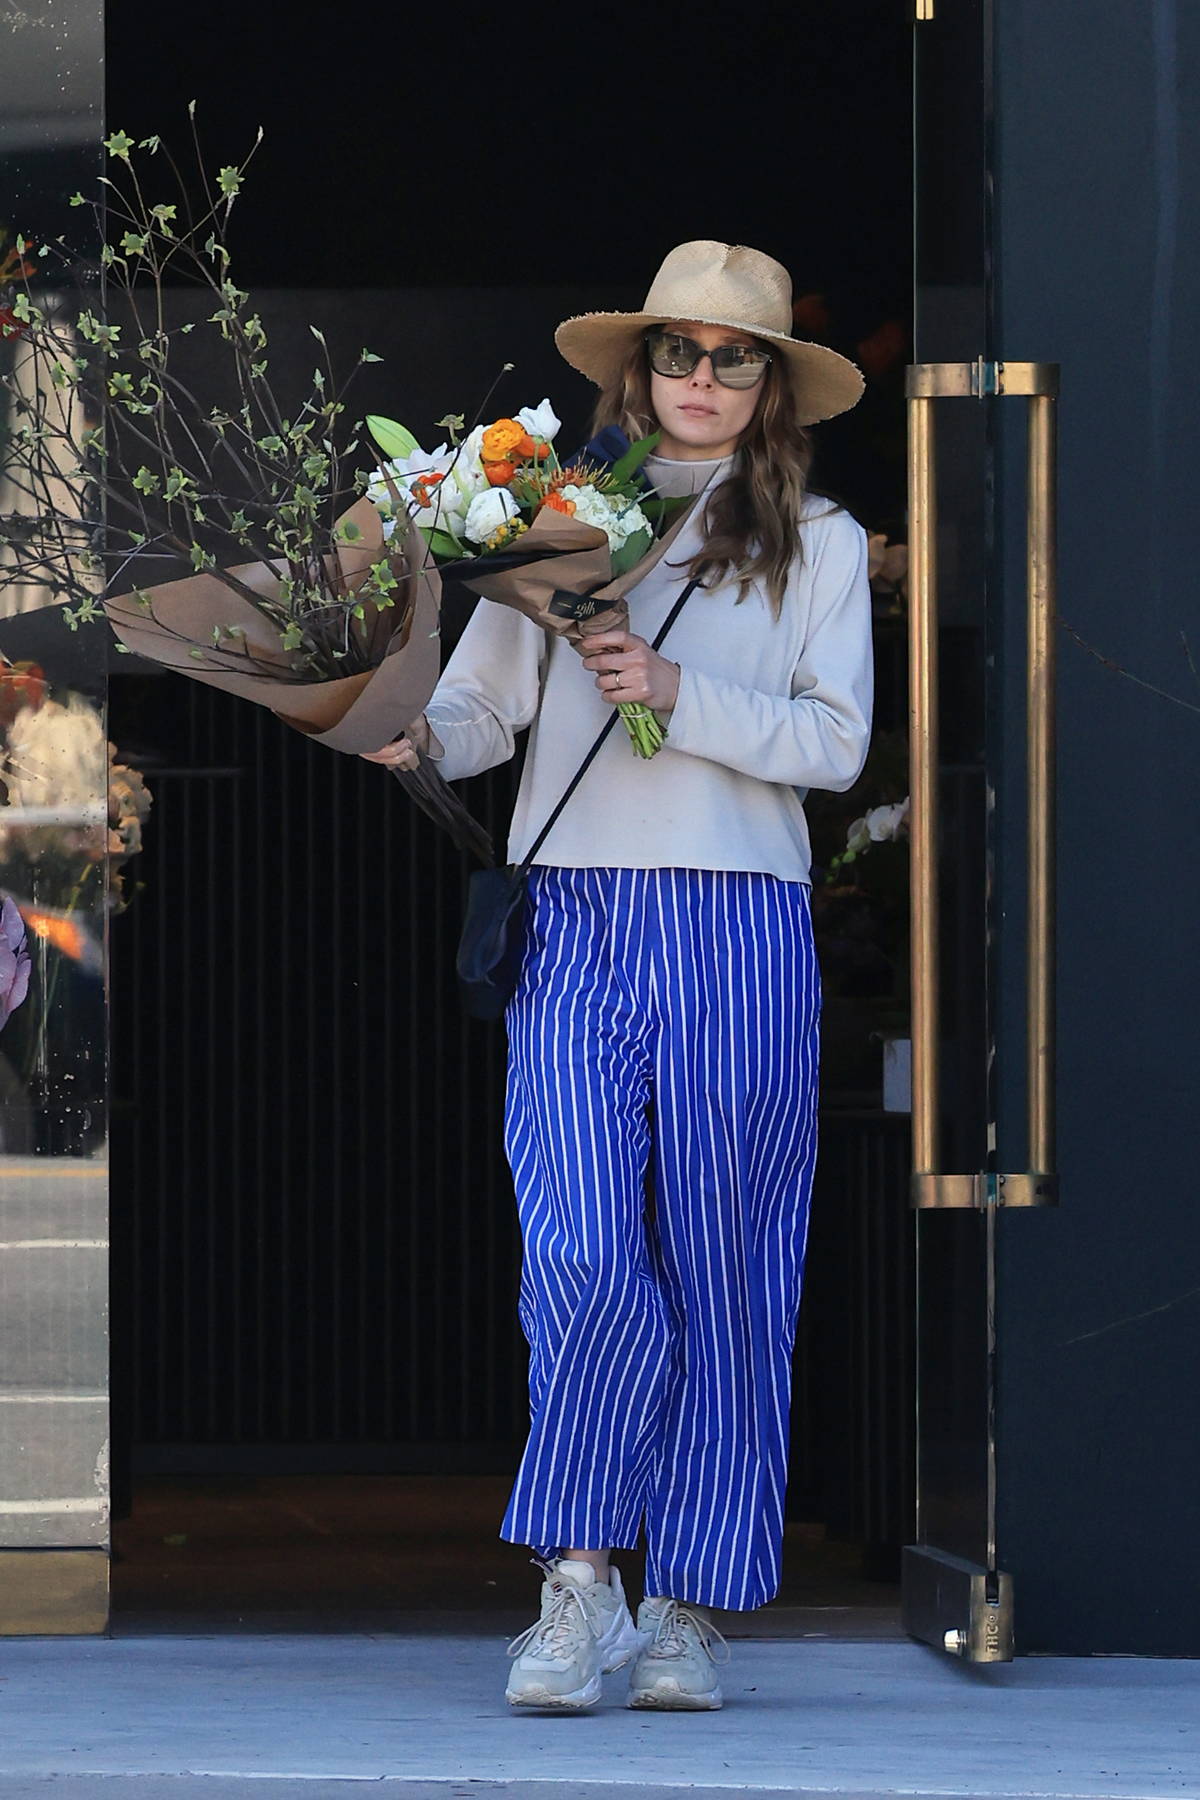 Elizabeth-Olsen-shows-off-her-chic-summer-style-while-visiting-a-florist-in-Los-Angeles-160424_5.jpg